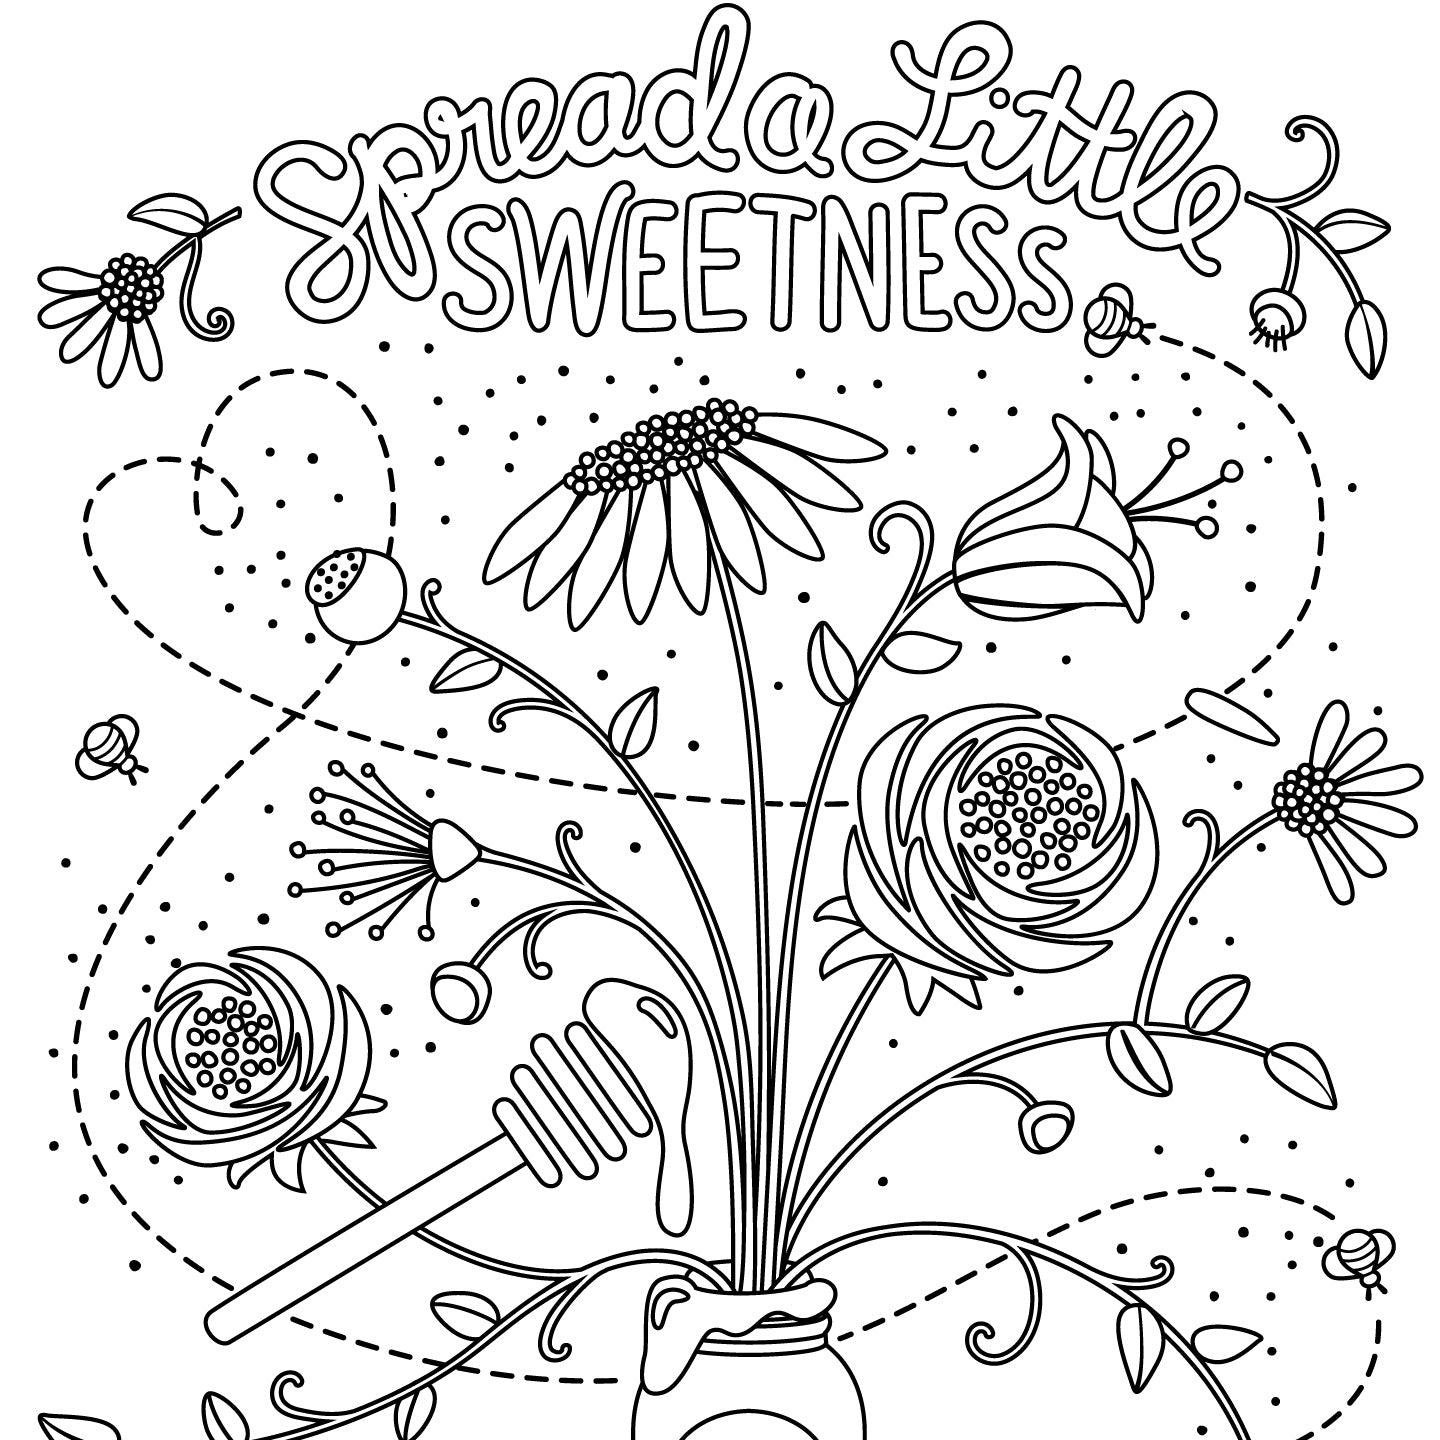 Spread a Little Sweetness Coloring Page - The Neighborgoods